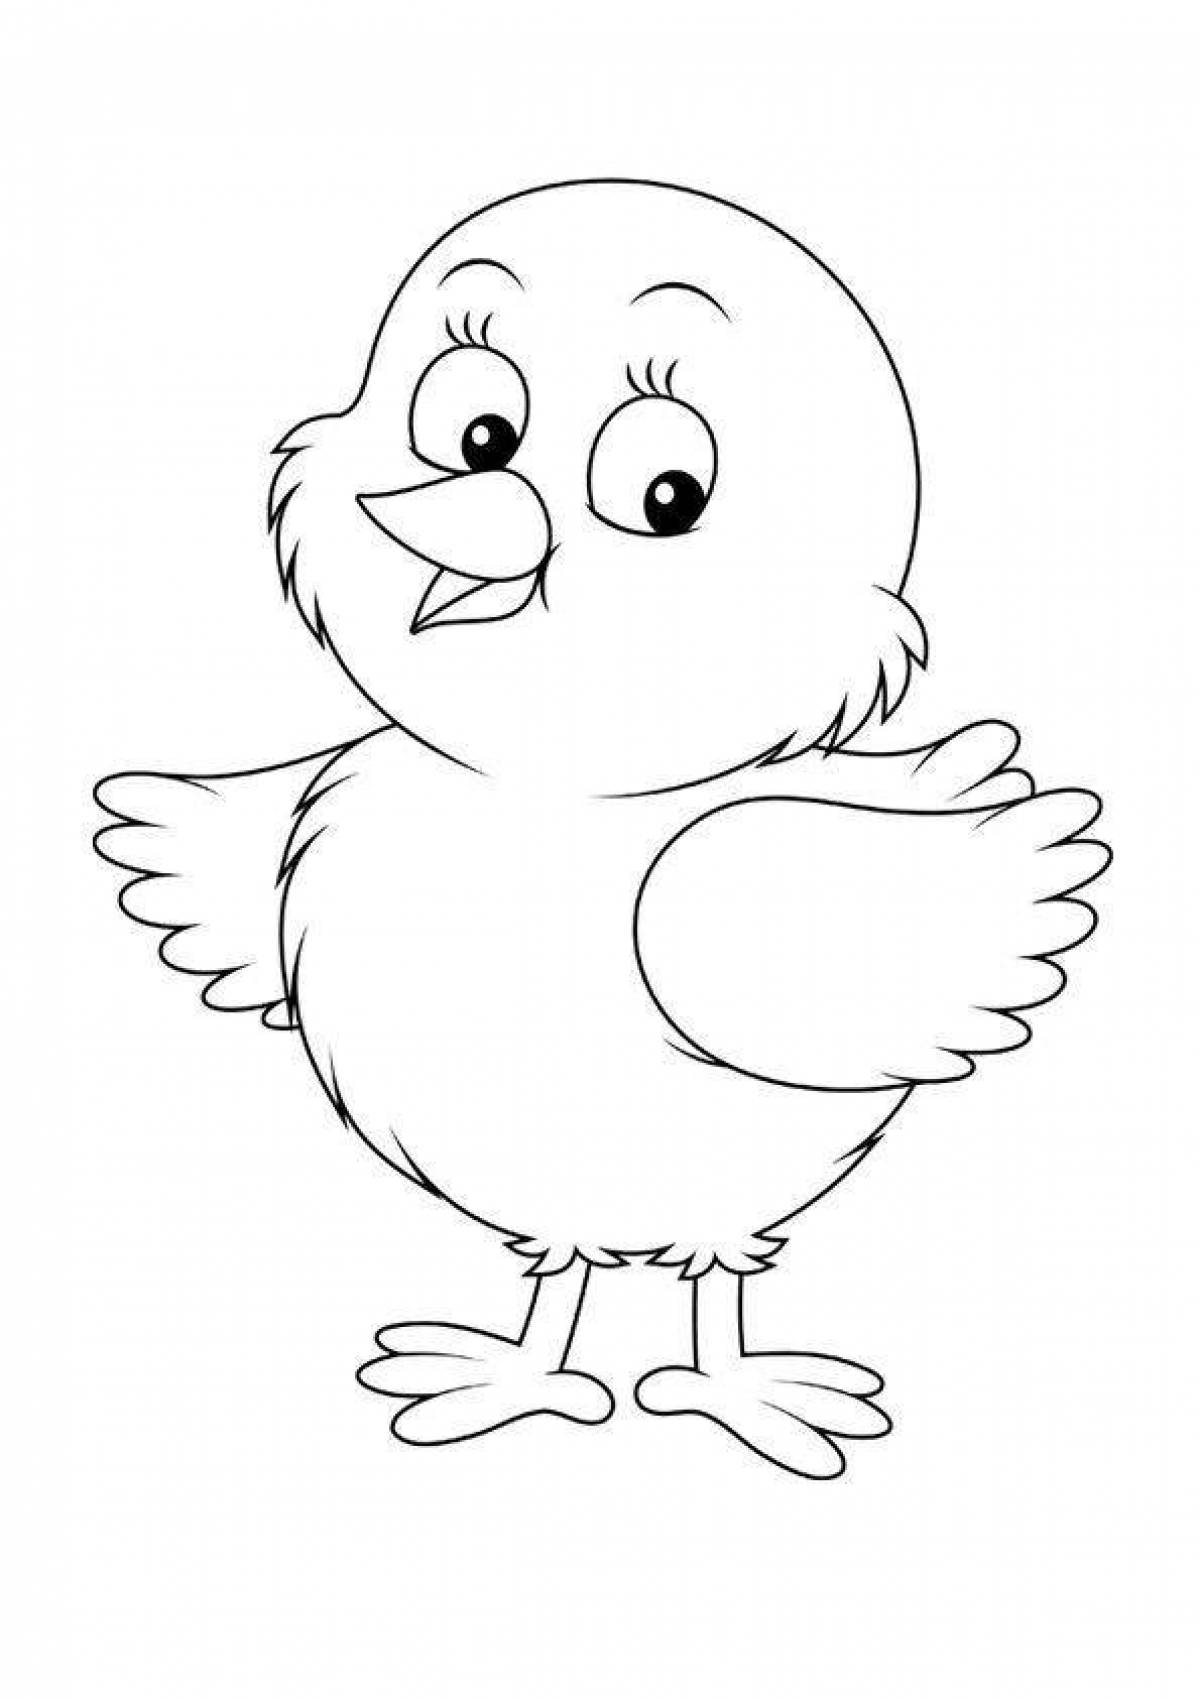 Cute chick coloring book for 3-4 year olds